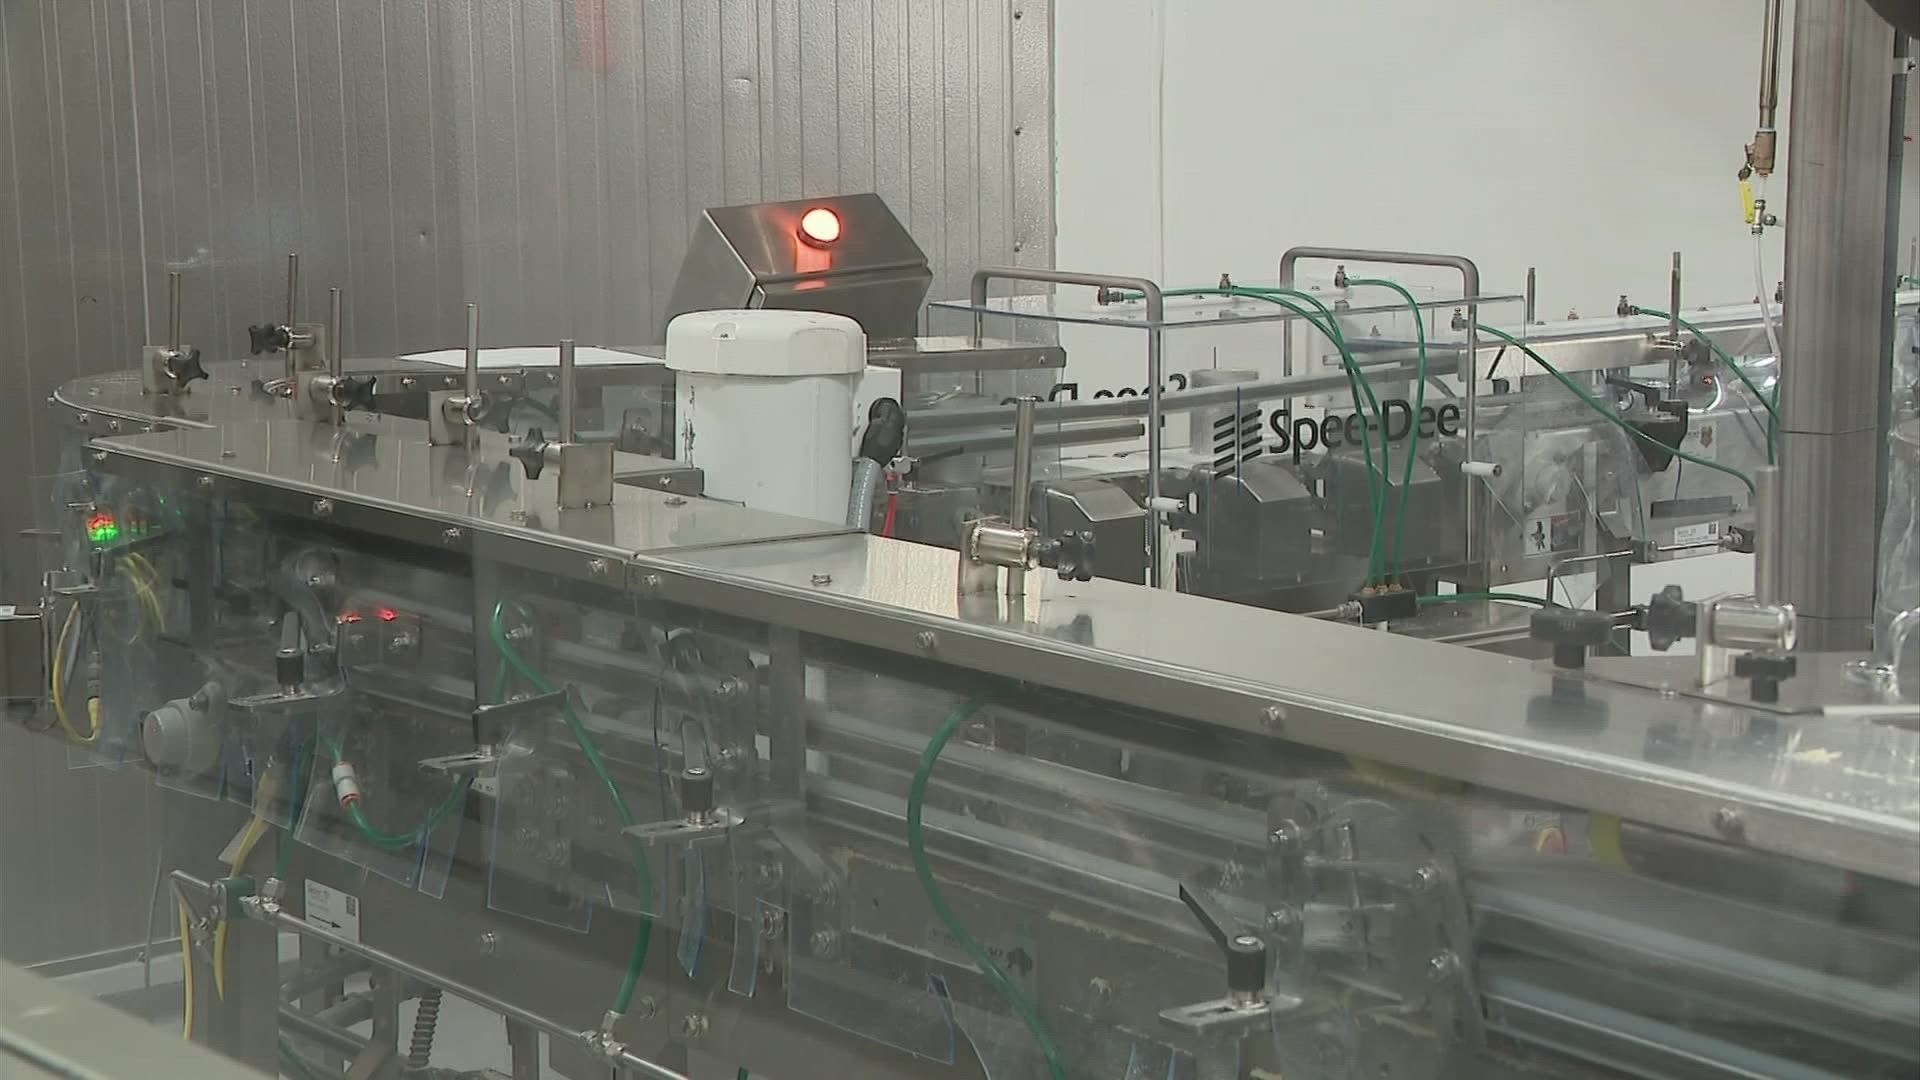 10TV took a tour inside the Heath based facility that opened in 2020 to see what it takes to create a formula for the tiniest of consumers.